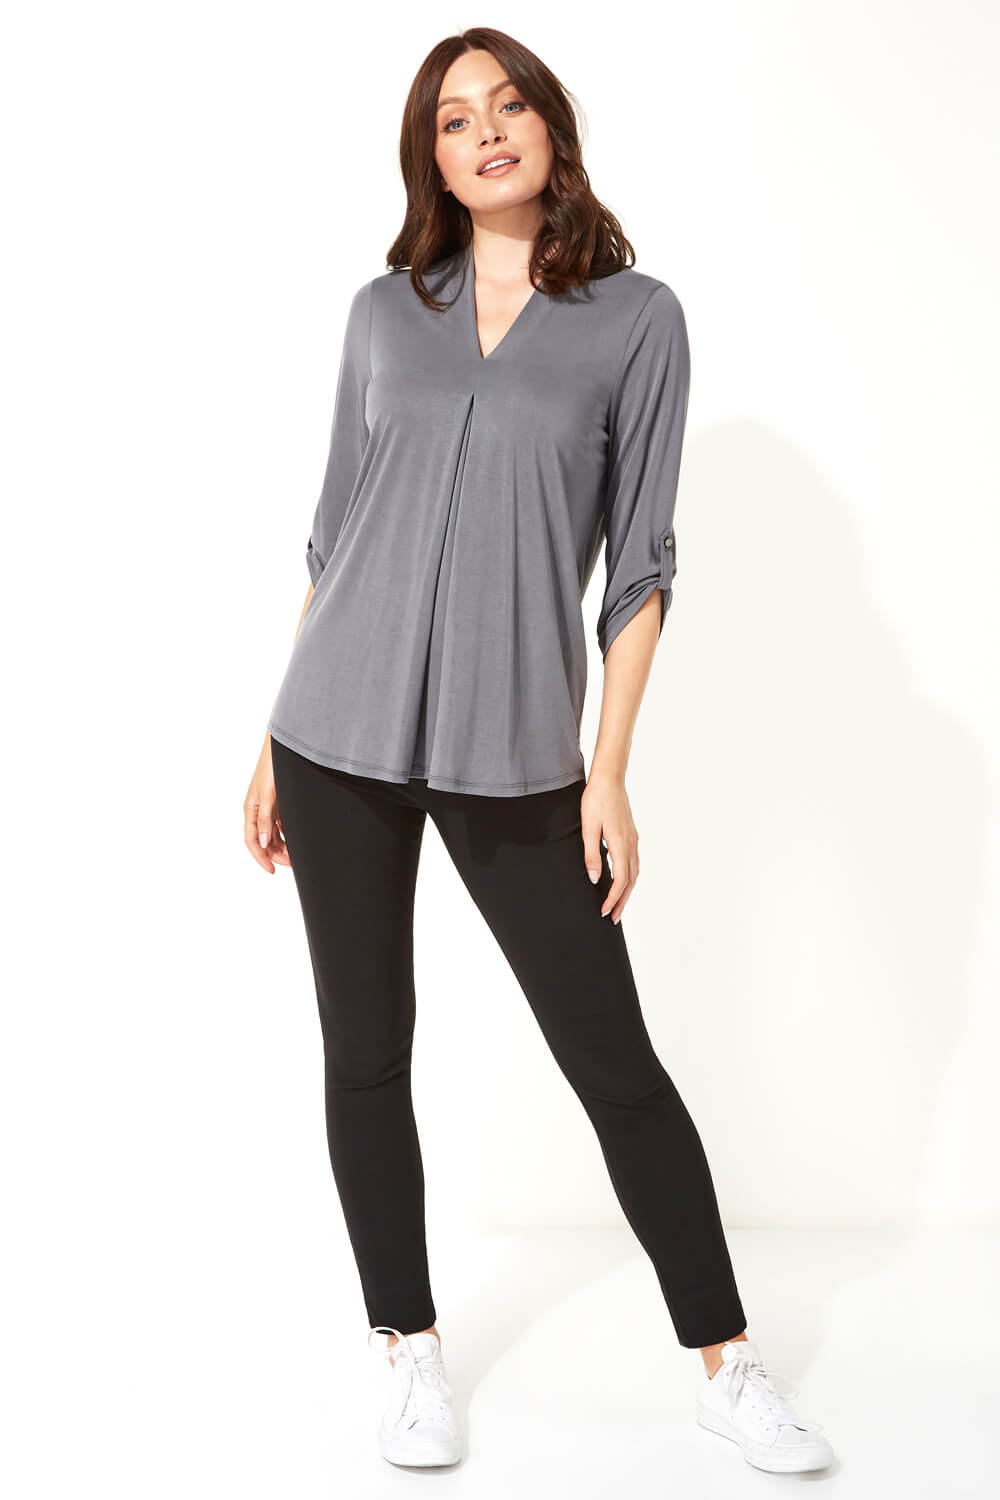 Grey Pleat Front 3/4 Sleeve Top, Image 2 of 5